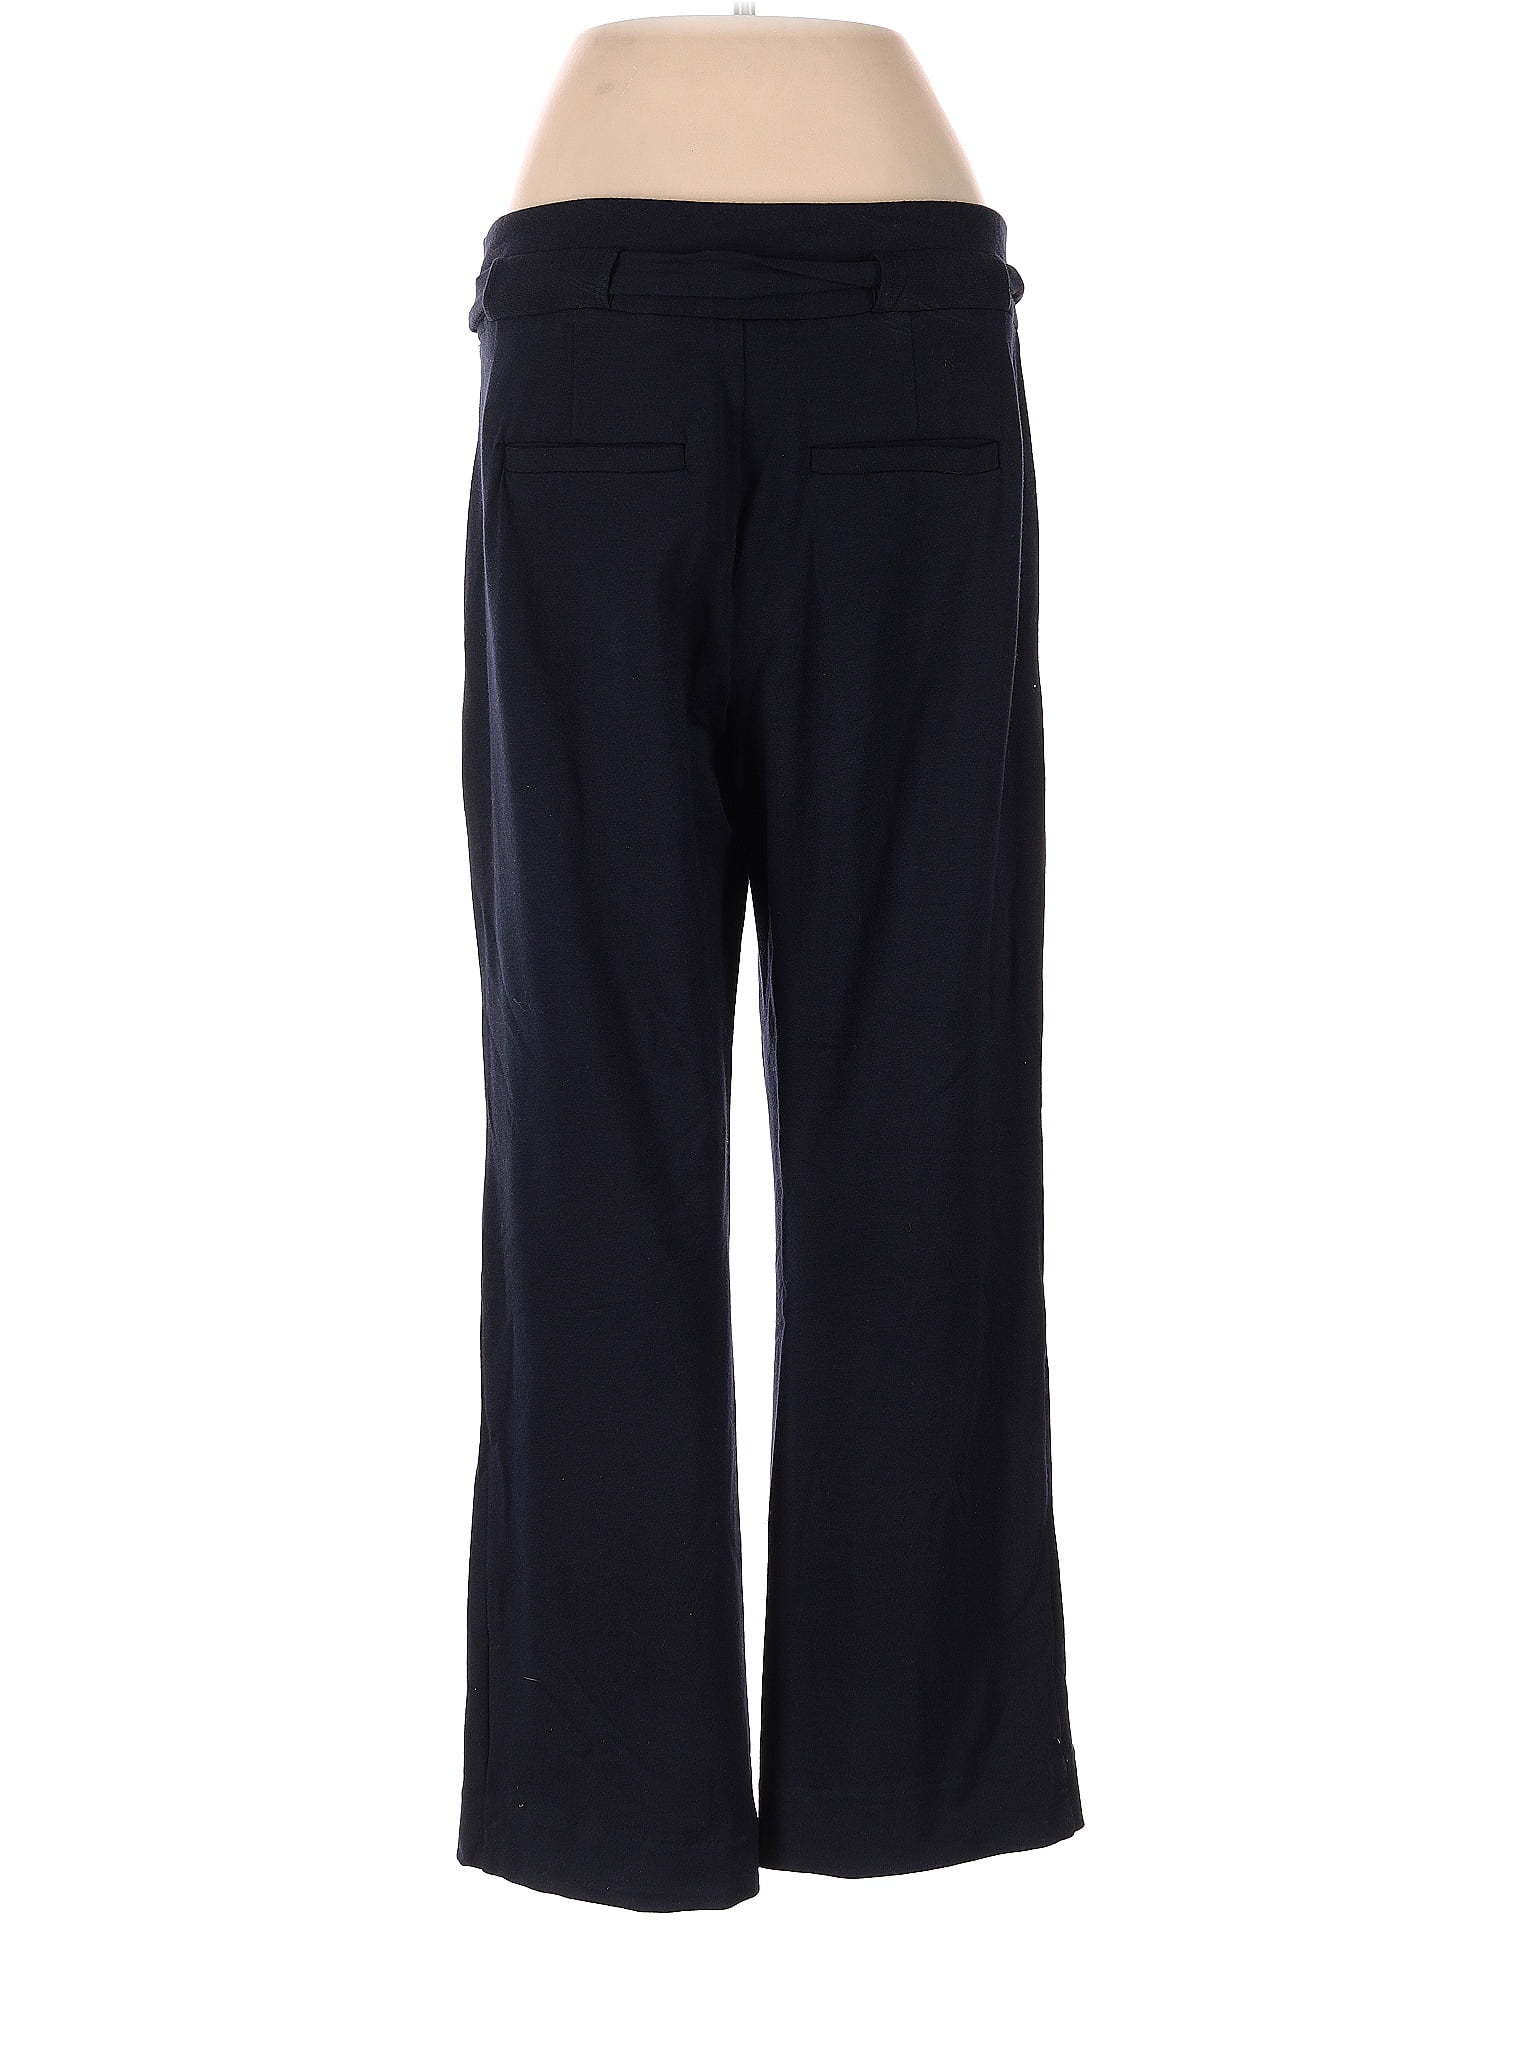 Mossimo Supply Co. Blue Active Pants Size XL - 52% off